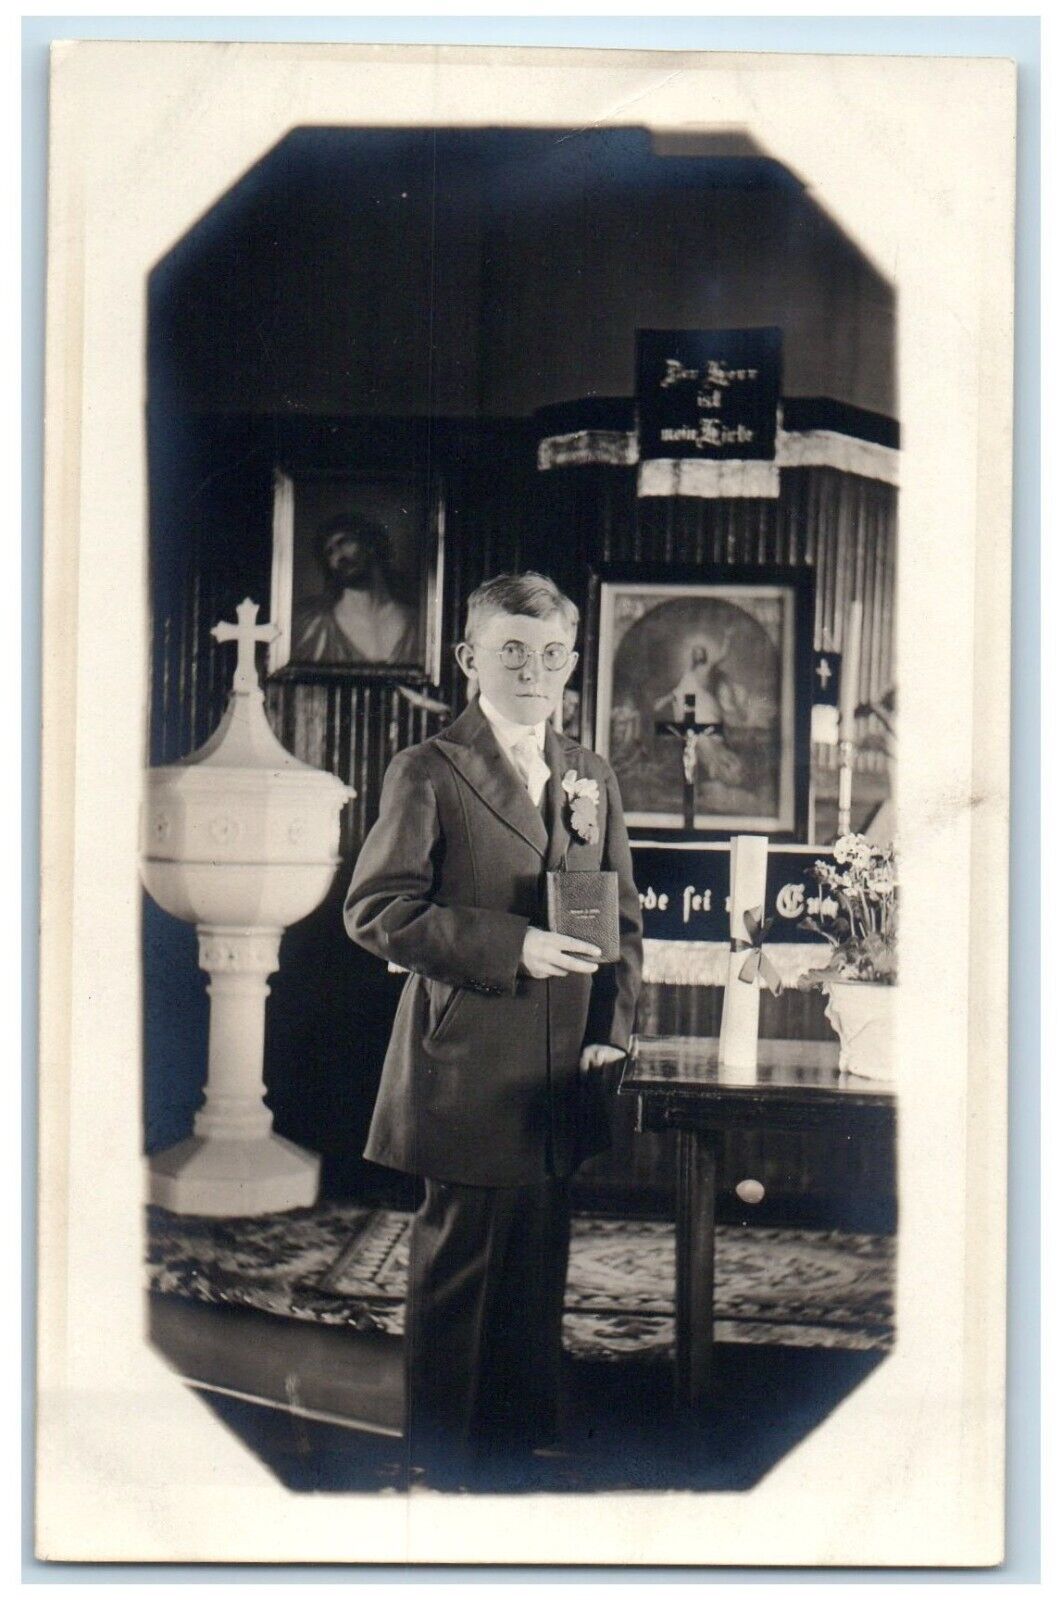 Boy With Bible On Chapel Christian Confirmation Religious RPPC Photo Postcard